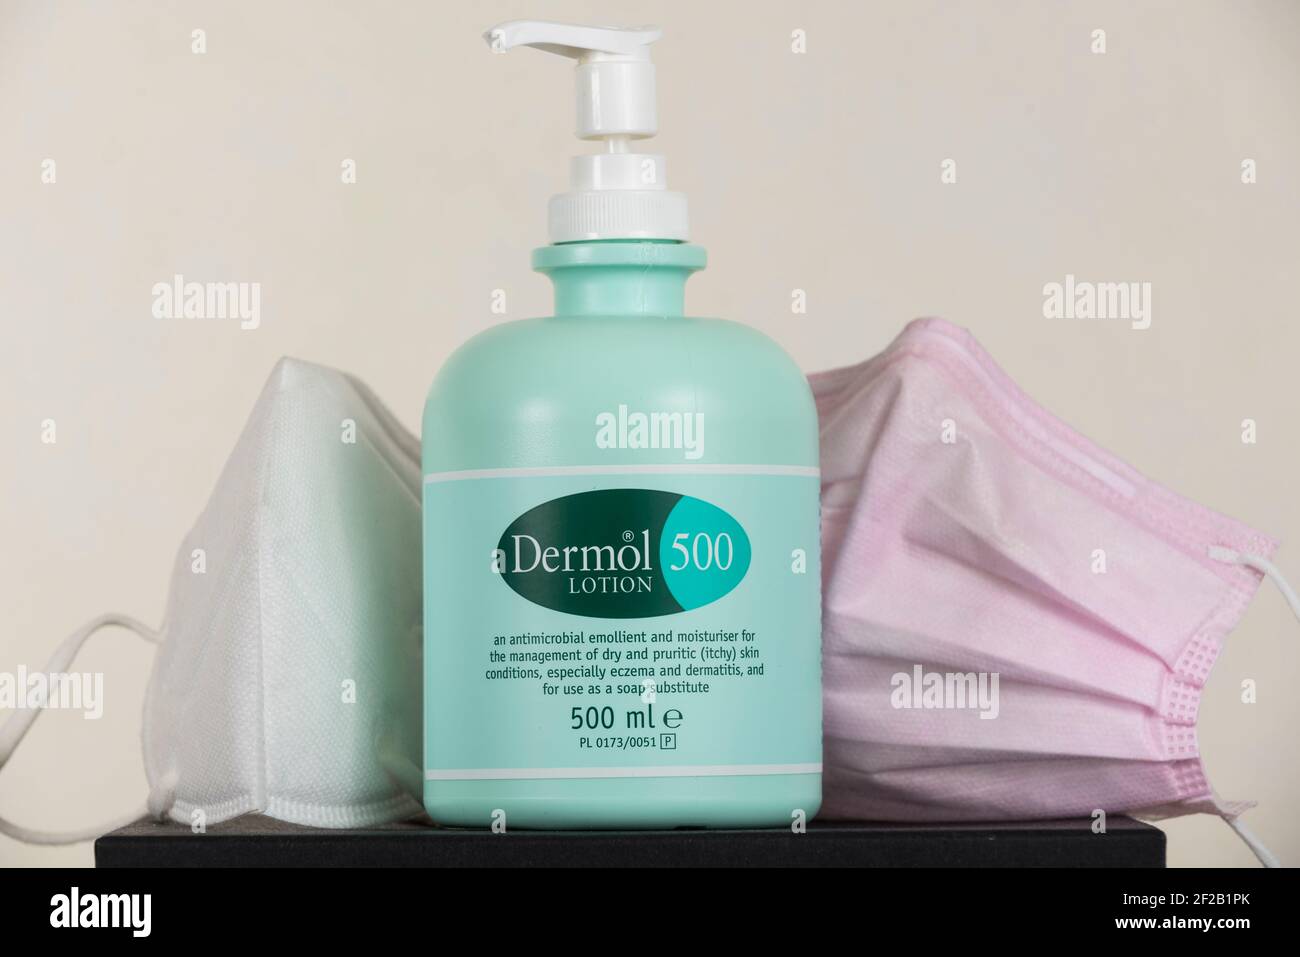 London, UK. 11 March 2021. A bottle of Dermol 500, an antimicrobial soap  substitute which also contains an emollient to help keep skin hydrated,  shown next to facemasks. It has been reported